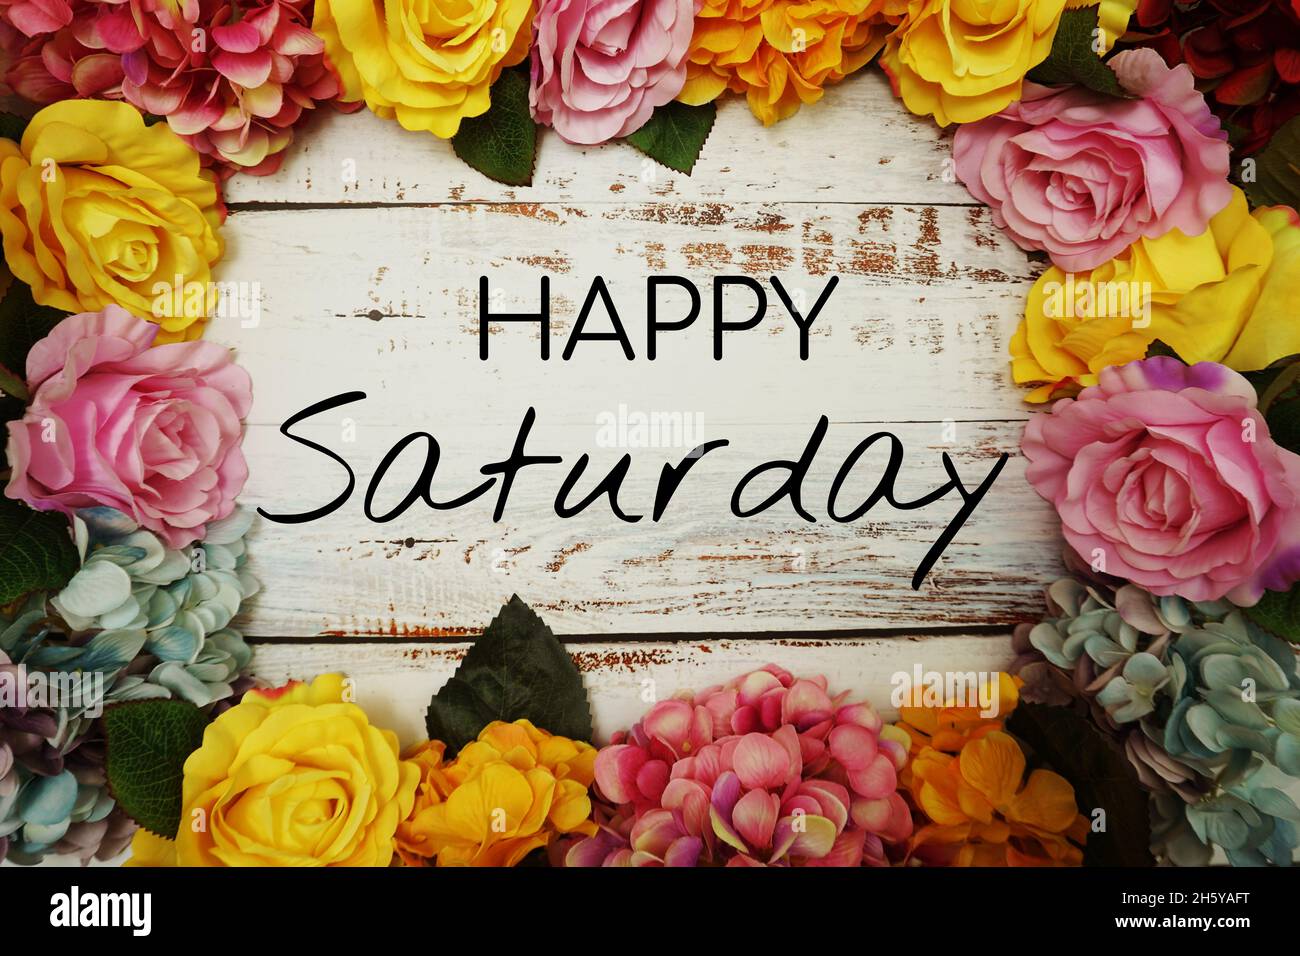 Happy Saturday text and Flowers Colorful Border Frame on wooden ...